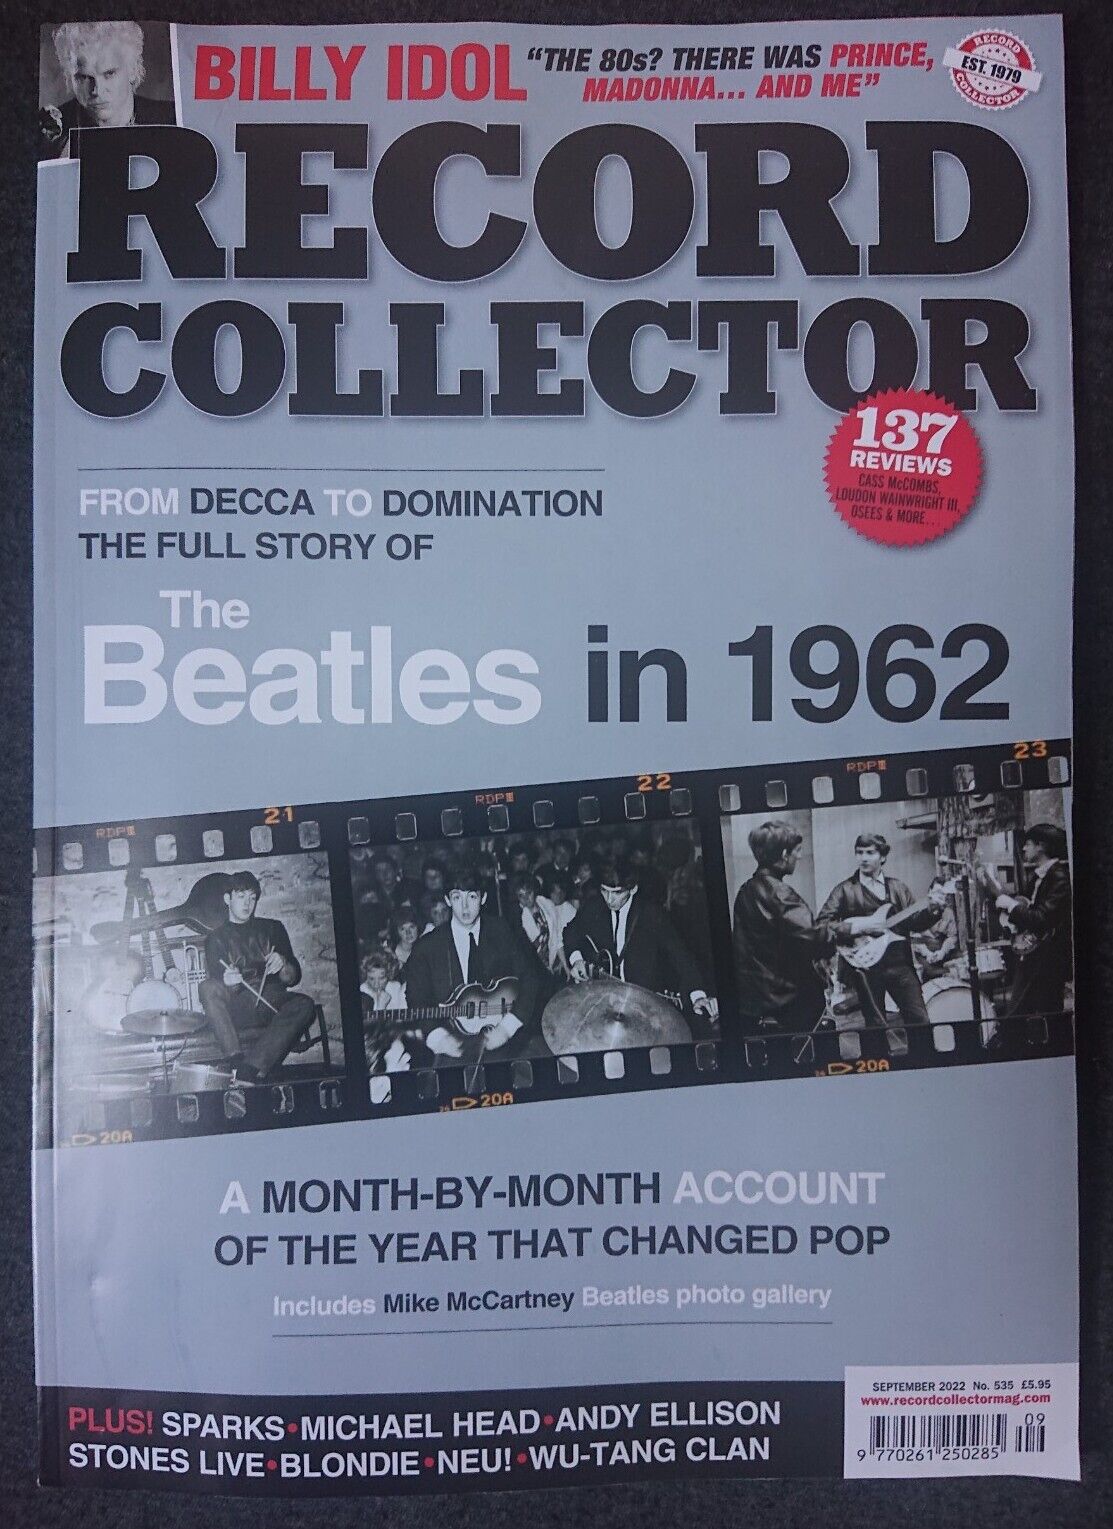 RECORD COLLECTOR MAGAZINE SEPTEMBER 2022 The Beatles In 1962 Billy Idol